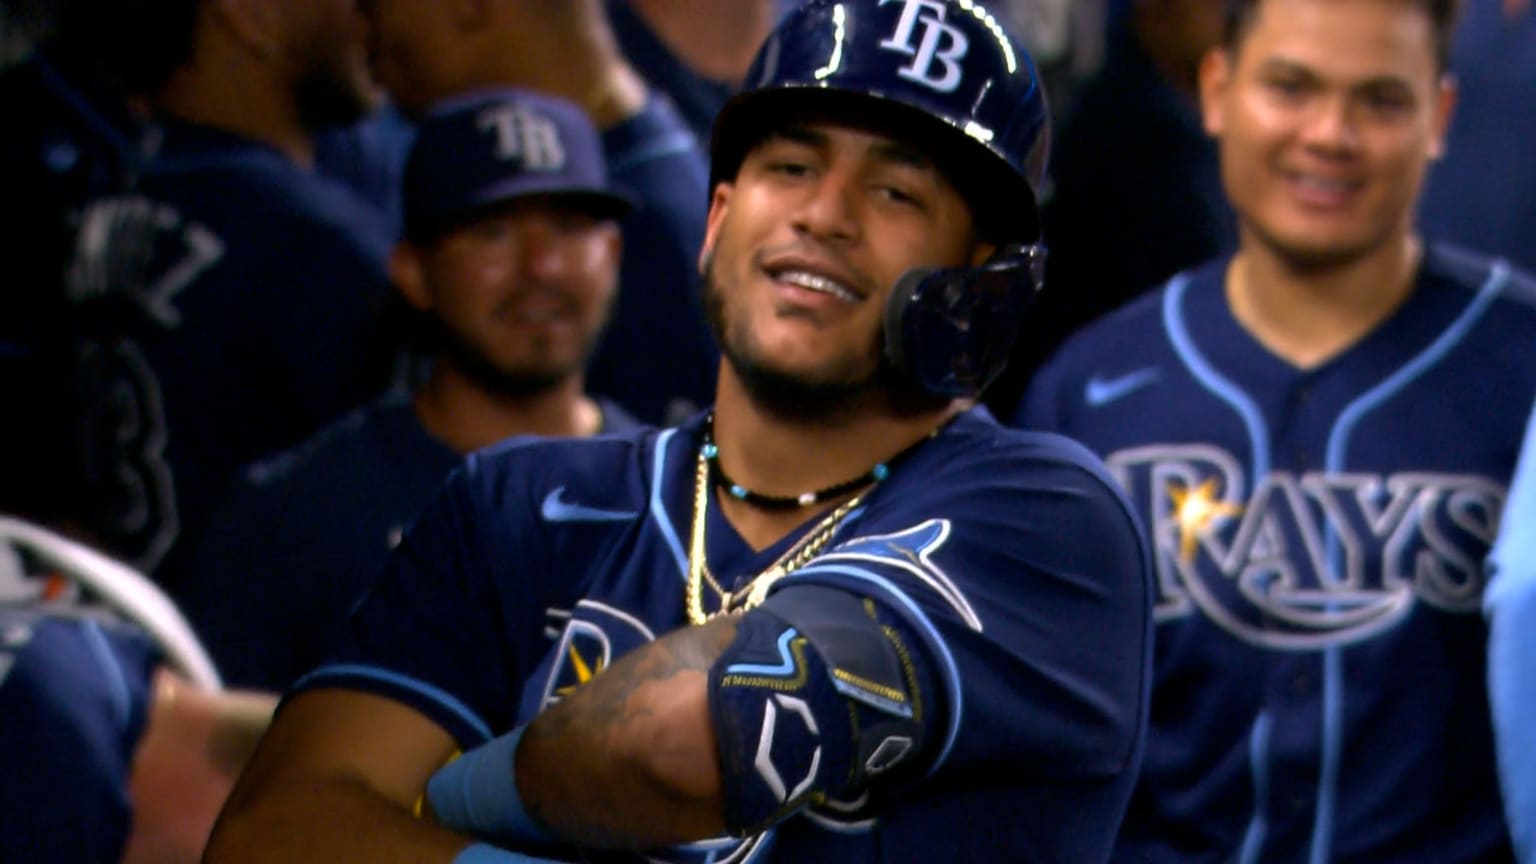 Jose Siri: The Rays, His Necklace, And Overall Play – Latino Sports